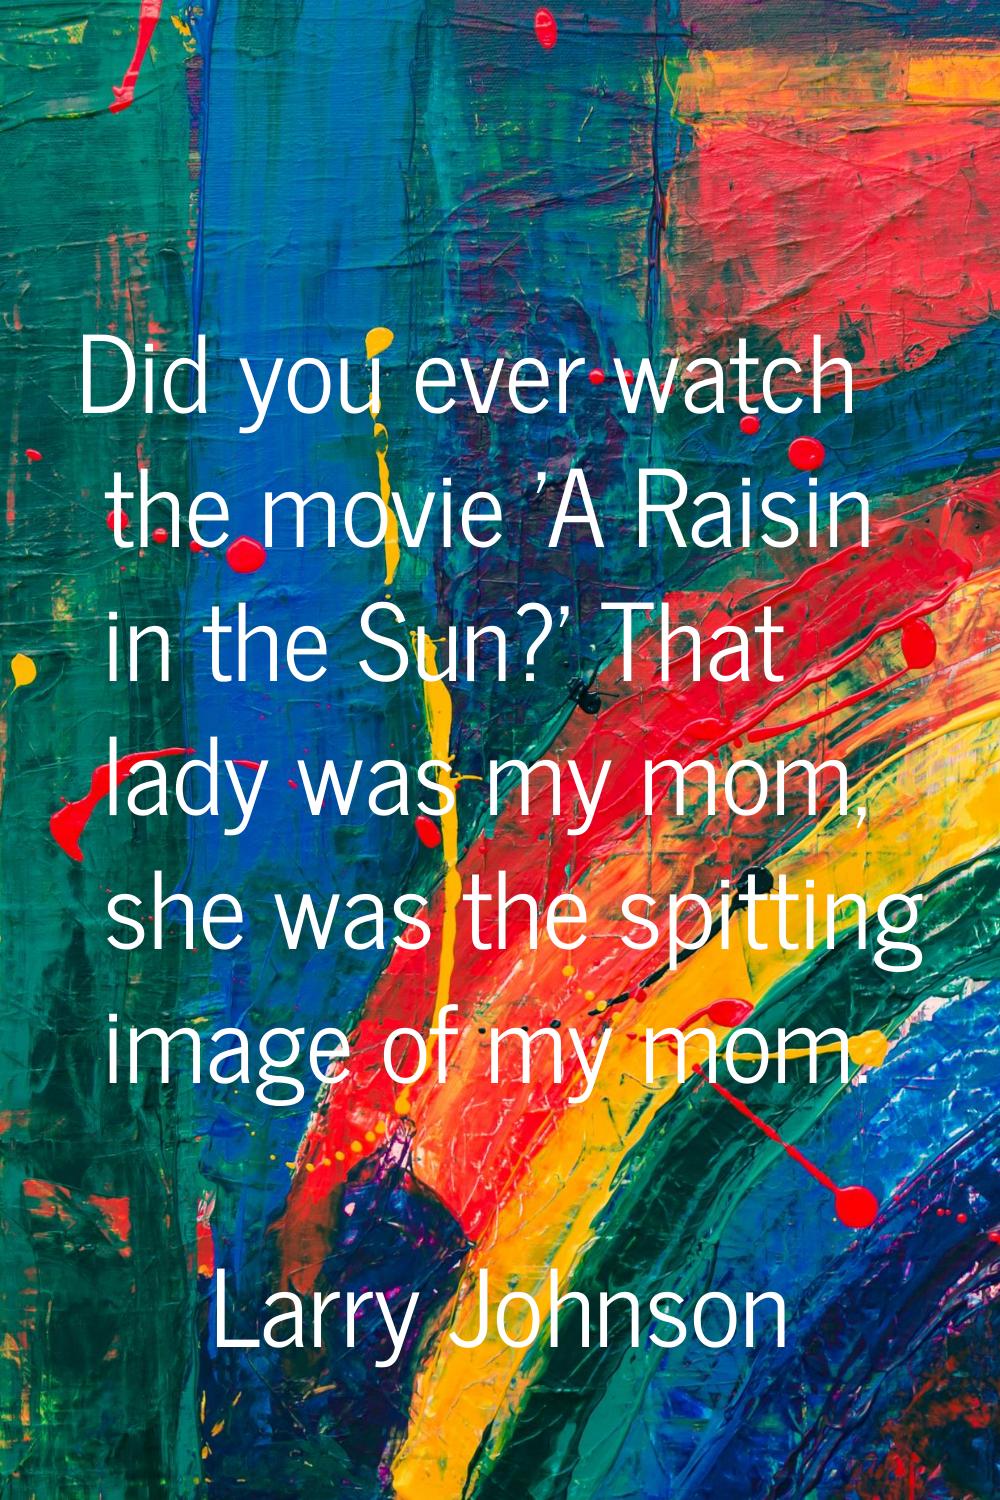 Did you ever watch the movie 'A Raisin in the Sun?' That lady was my mom, she was the spitting imag